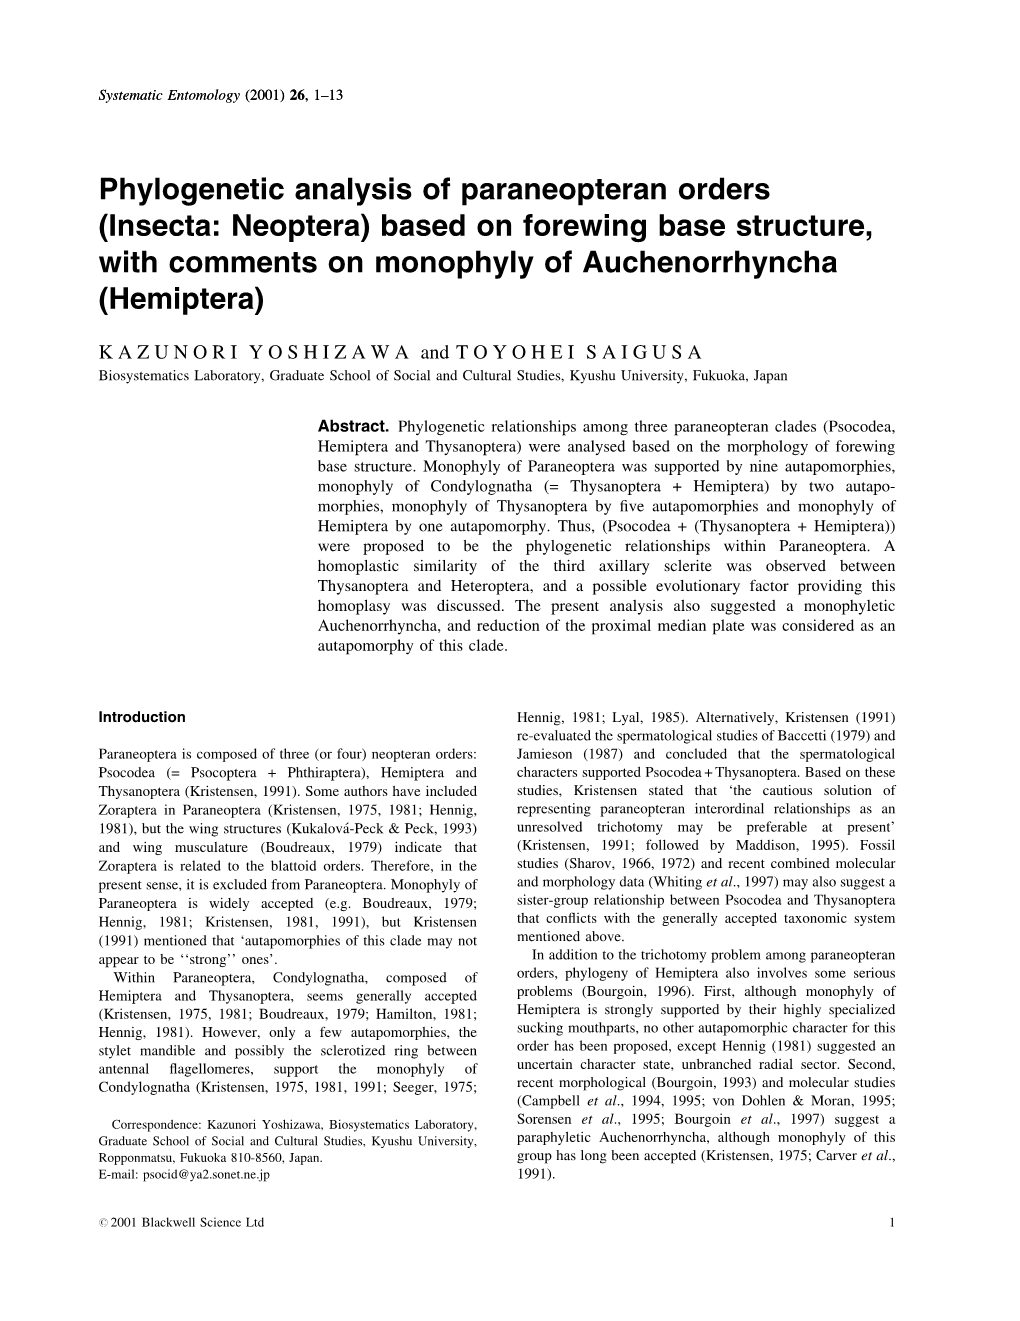 Phylogenetic Analysis of Paraneopteran Orders (Insecta: Neoptera) Based on Forewing Base Structure, with Comments on Monophyly of Auchenorrhyncha (Hemiptera)